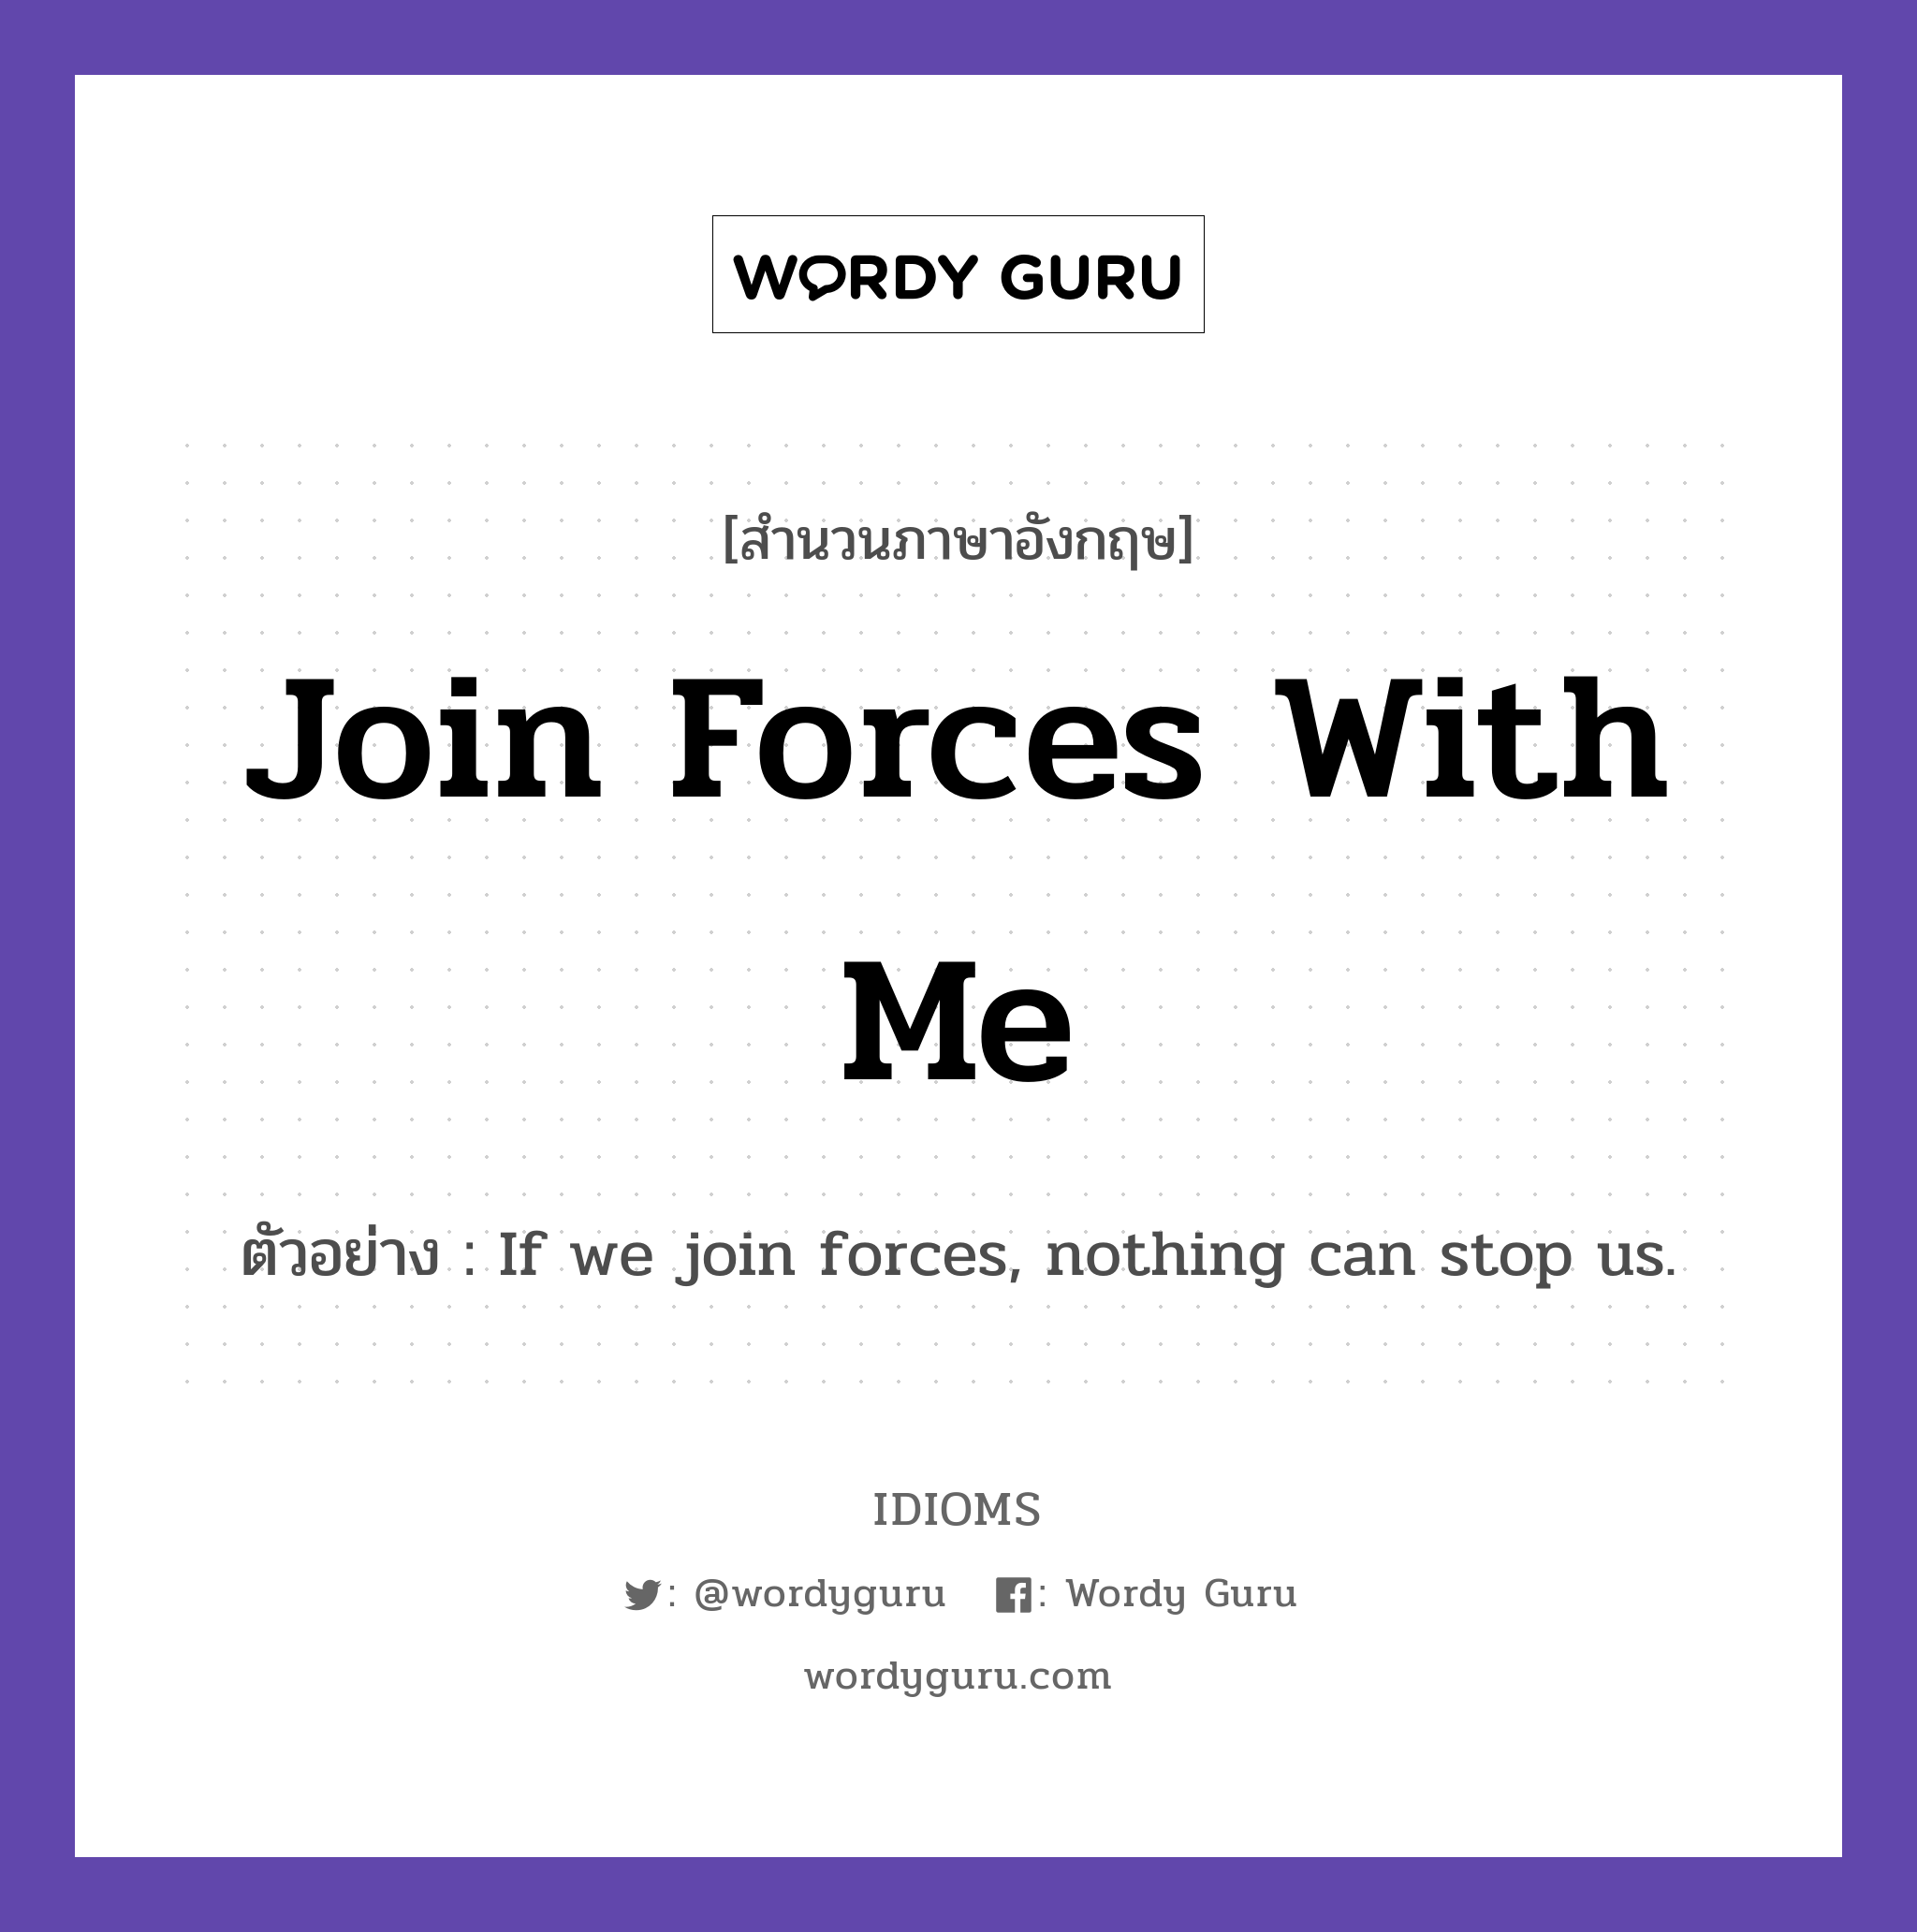 Join Forces With Me แปลว่า?, สำนวนภาษาอังกฤษ Join Forces With Me ตัวอย่าง If we join forces, nothing can stop us.